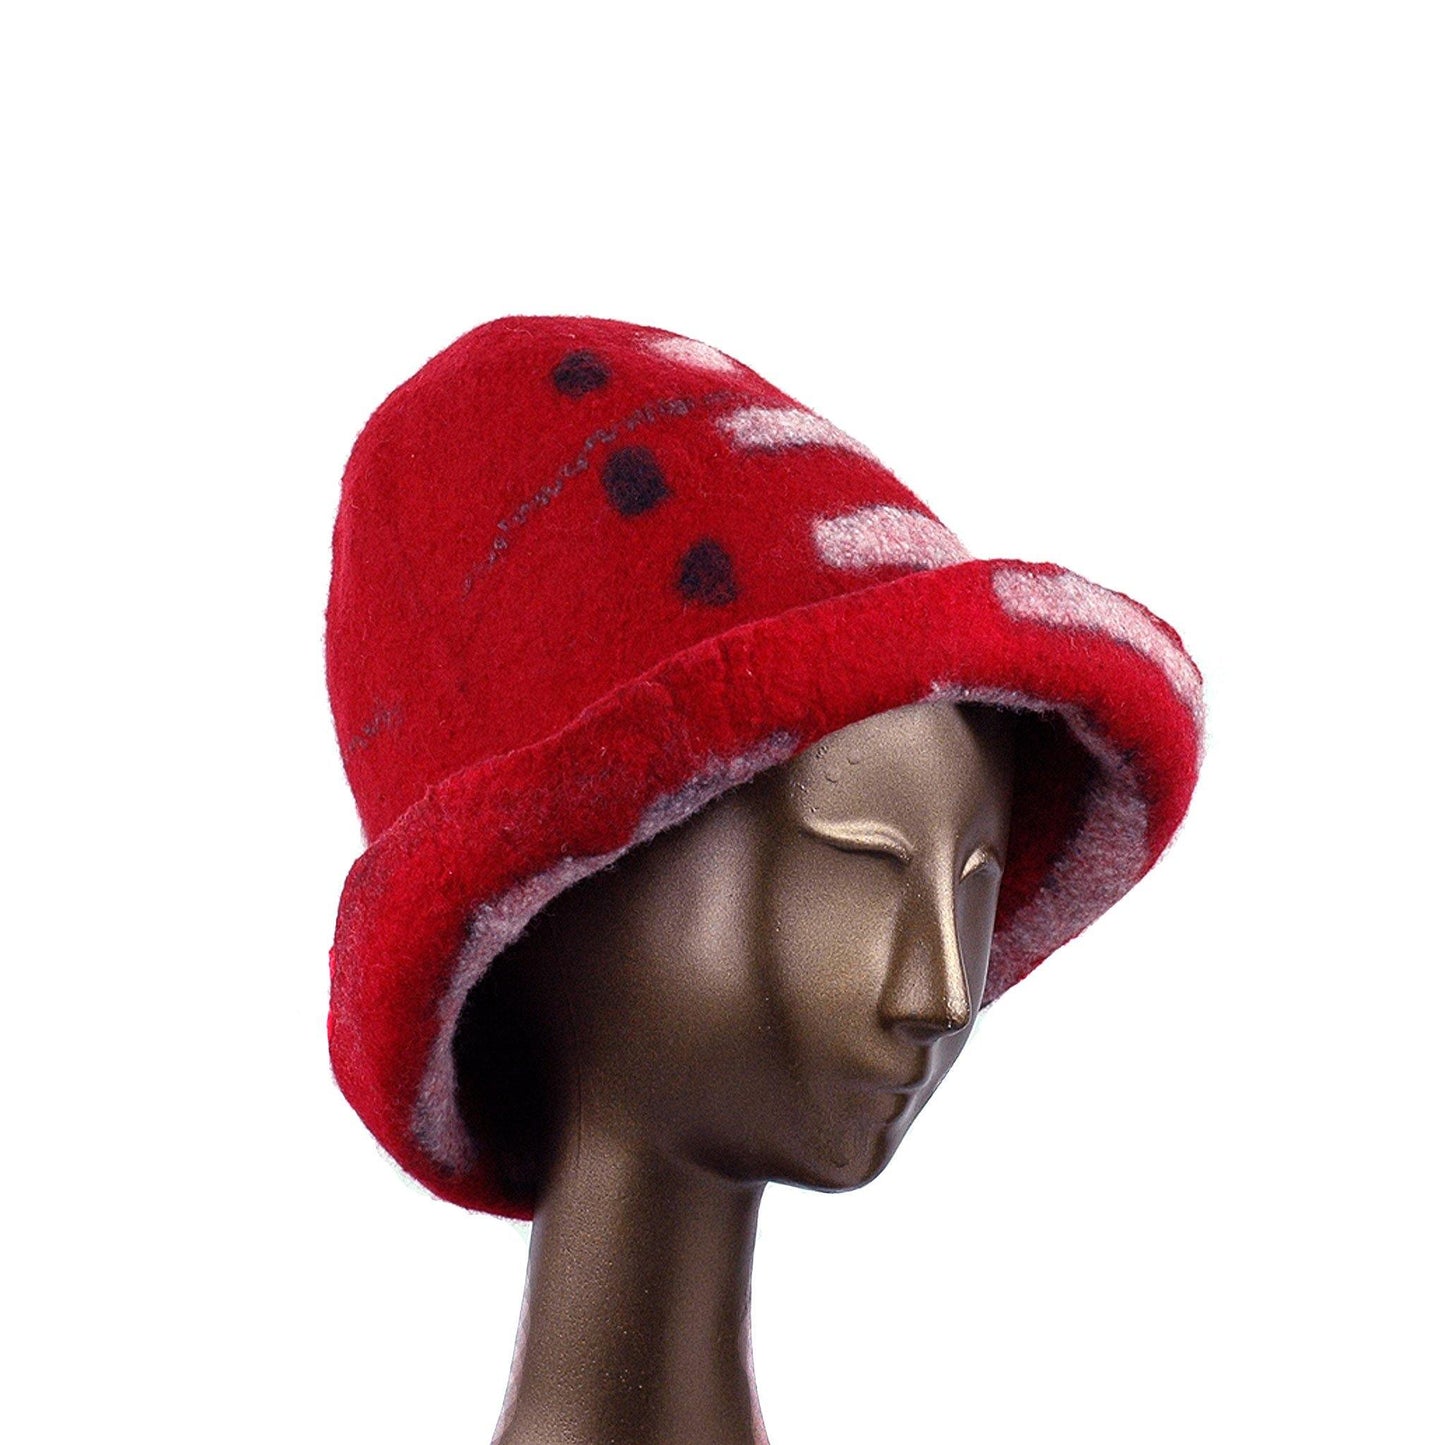 Tall Red and Black Brimmed Hat with Geometric Shapes - three quarters view